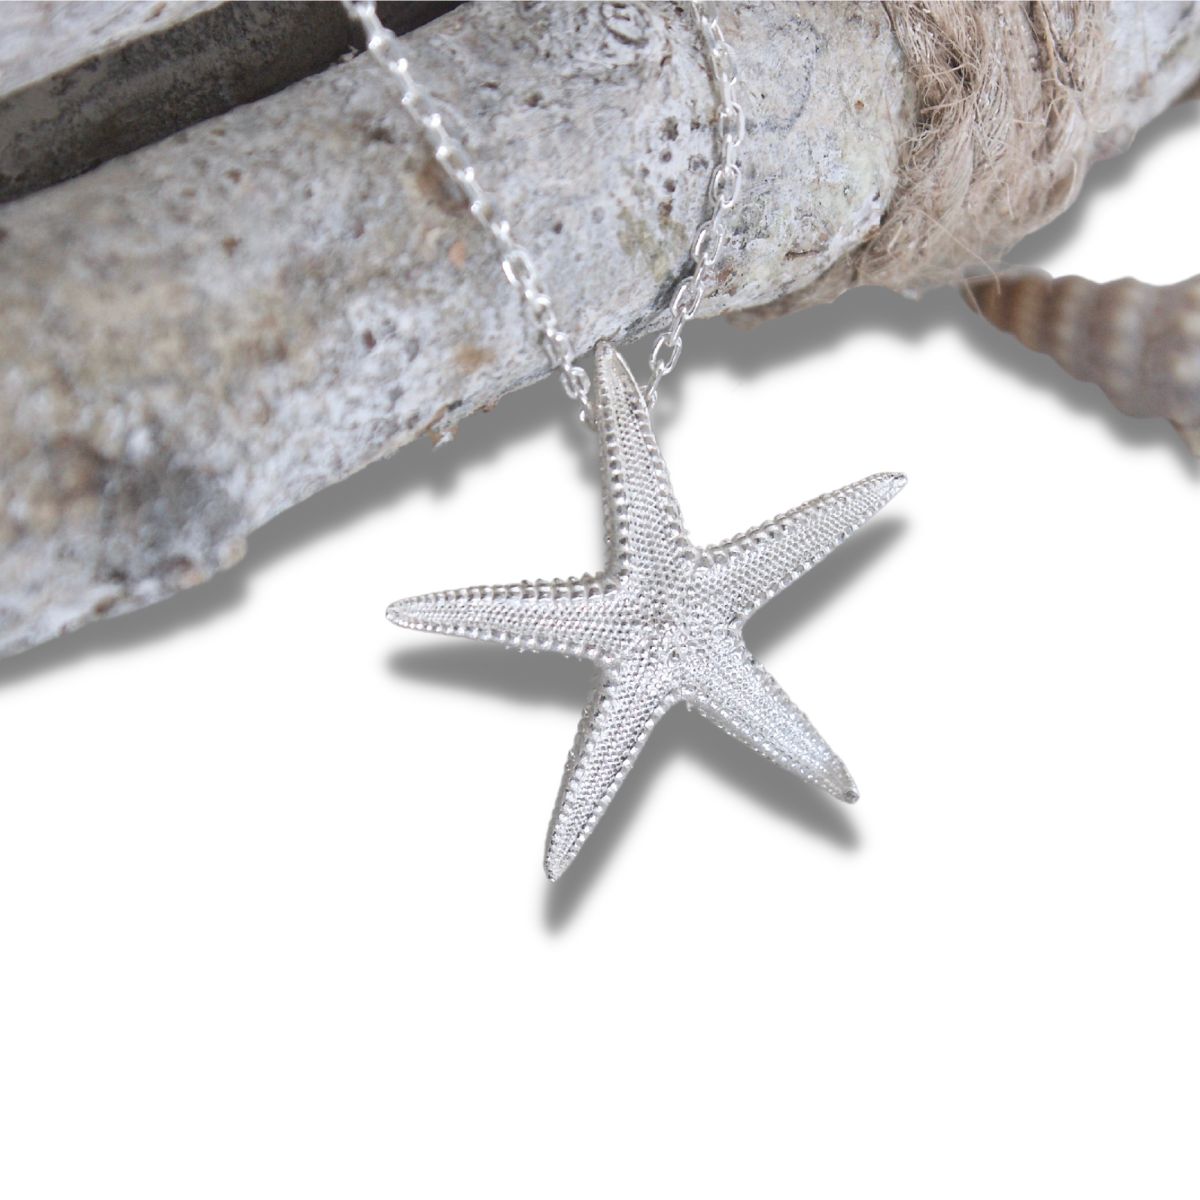 silver starfish necklace